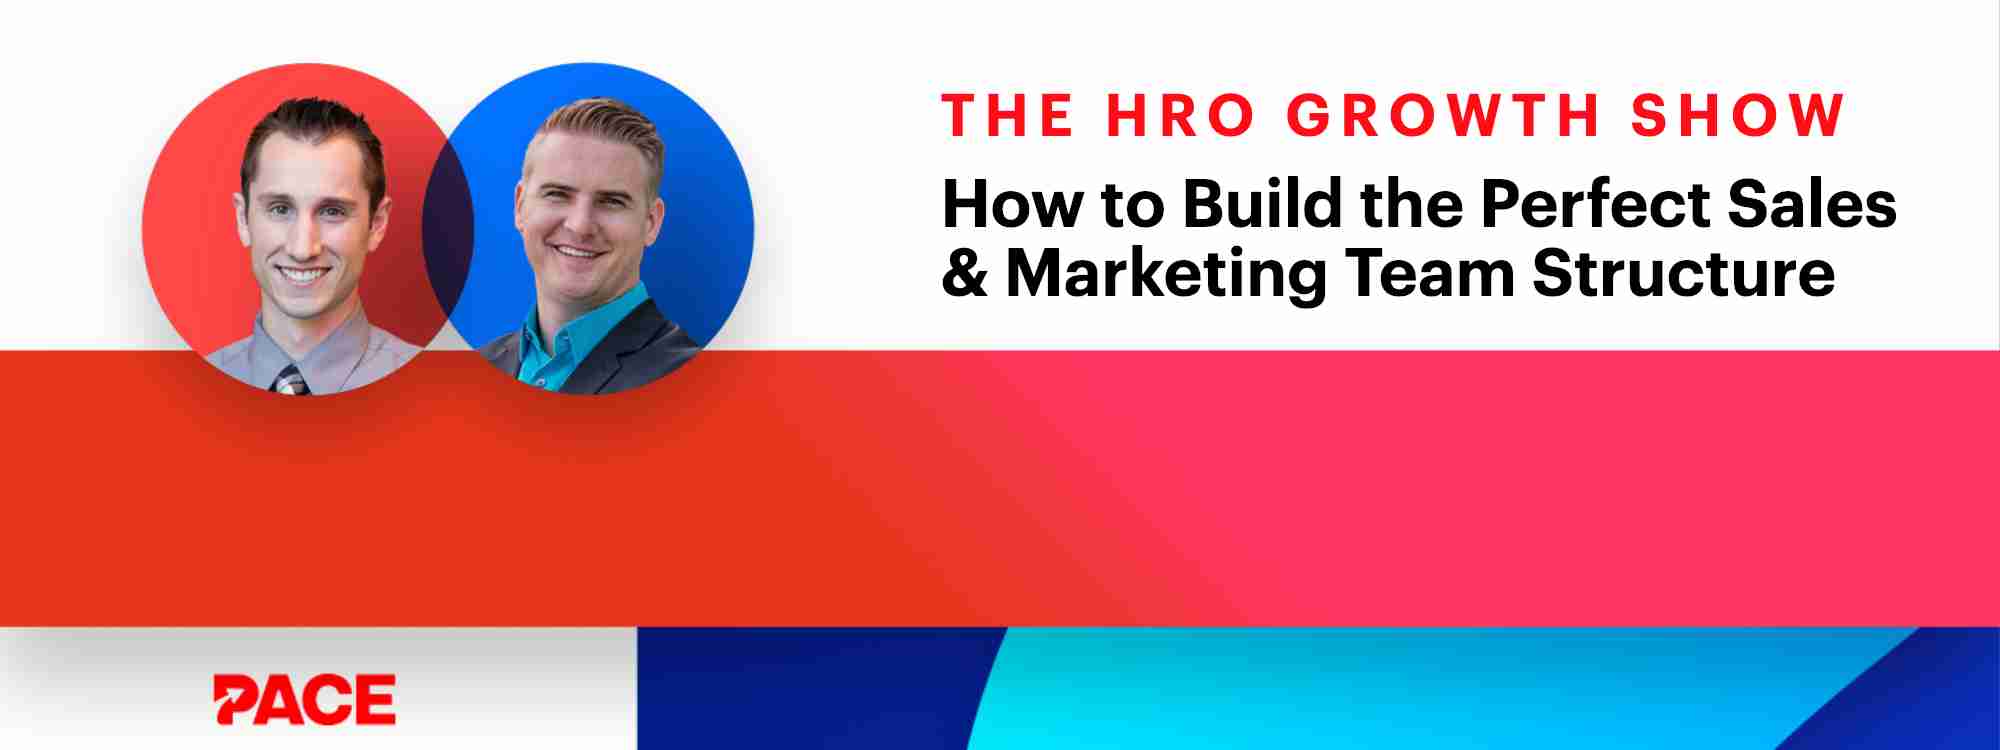 HRO Growth Show Blog Cover Ep 3